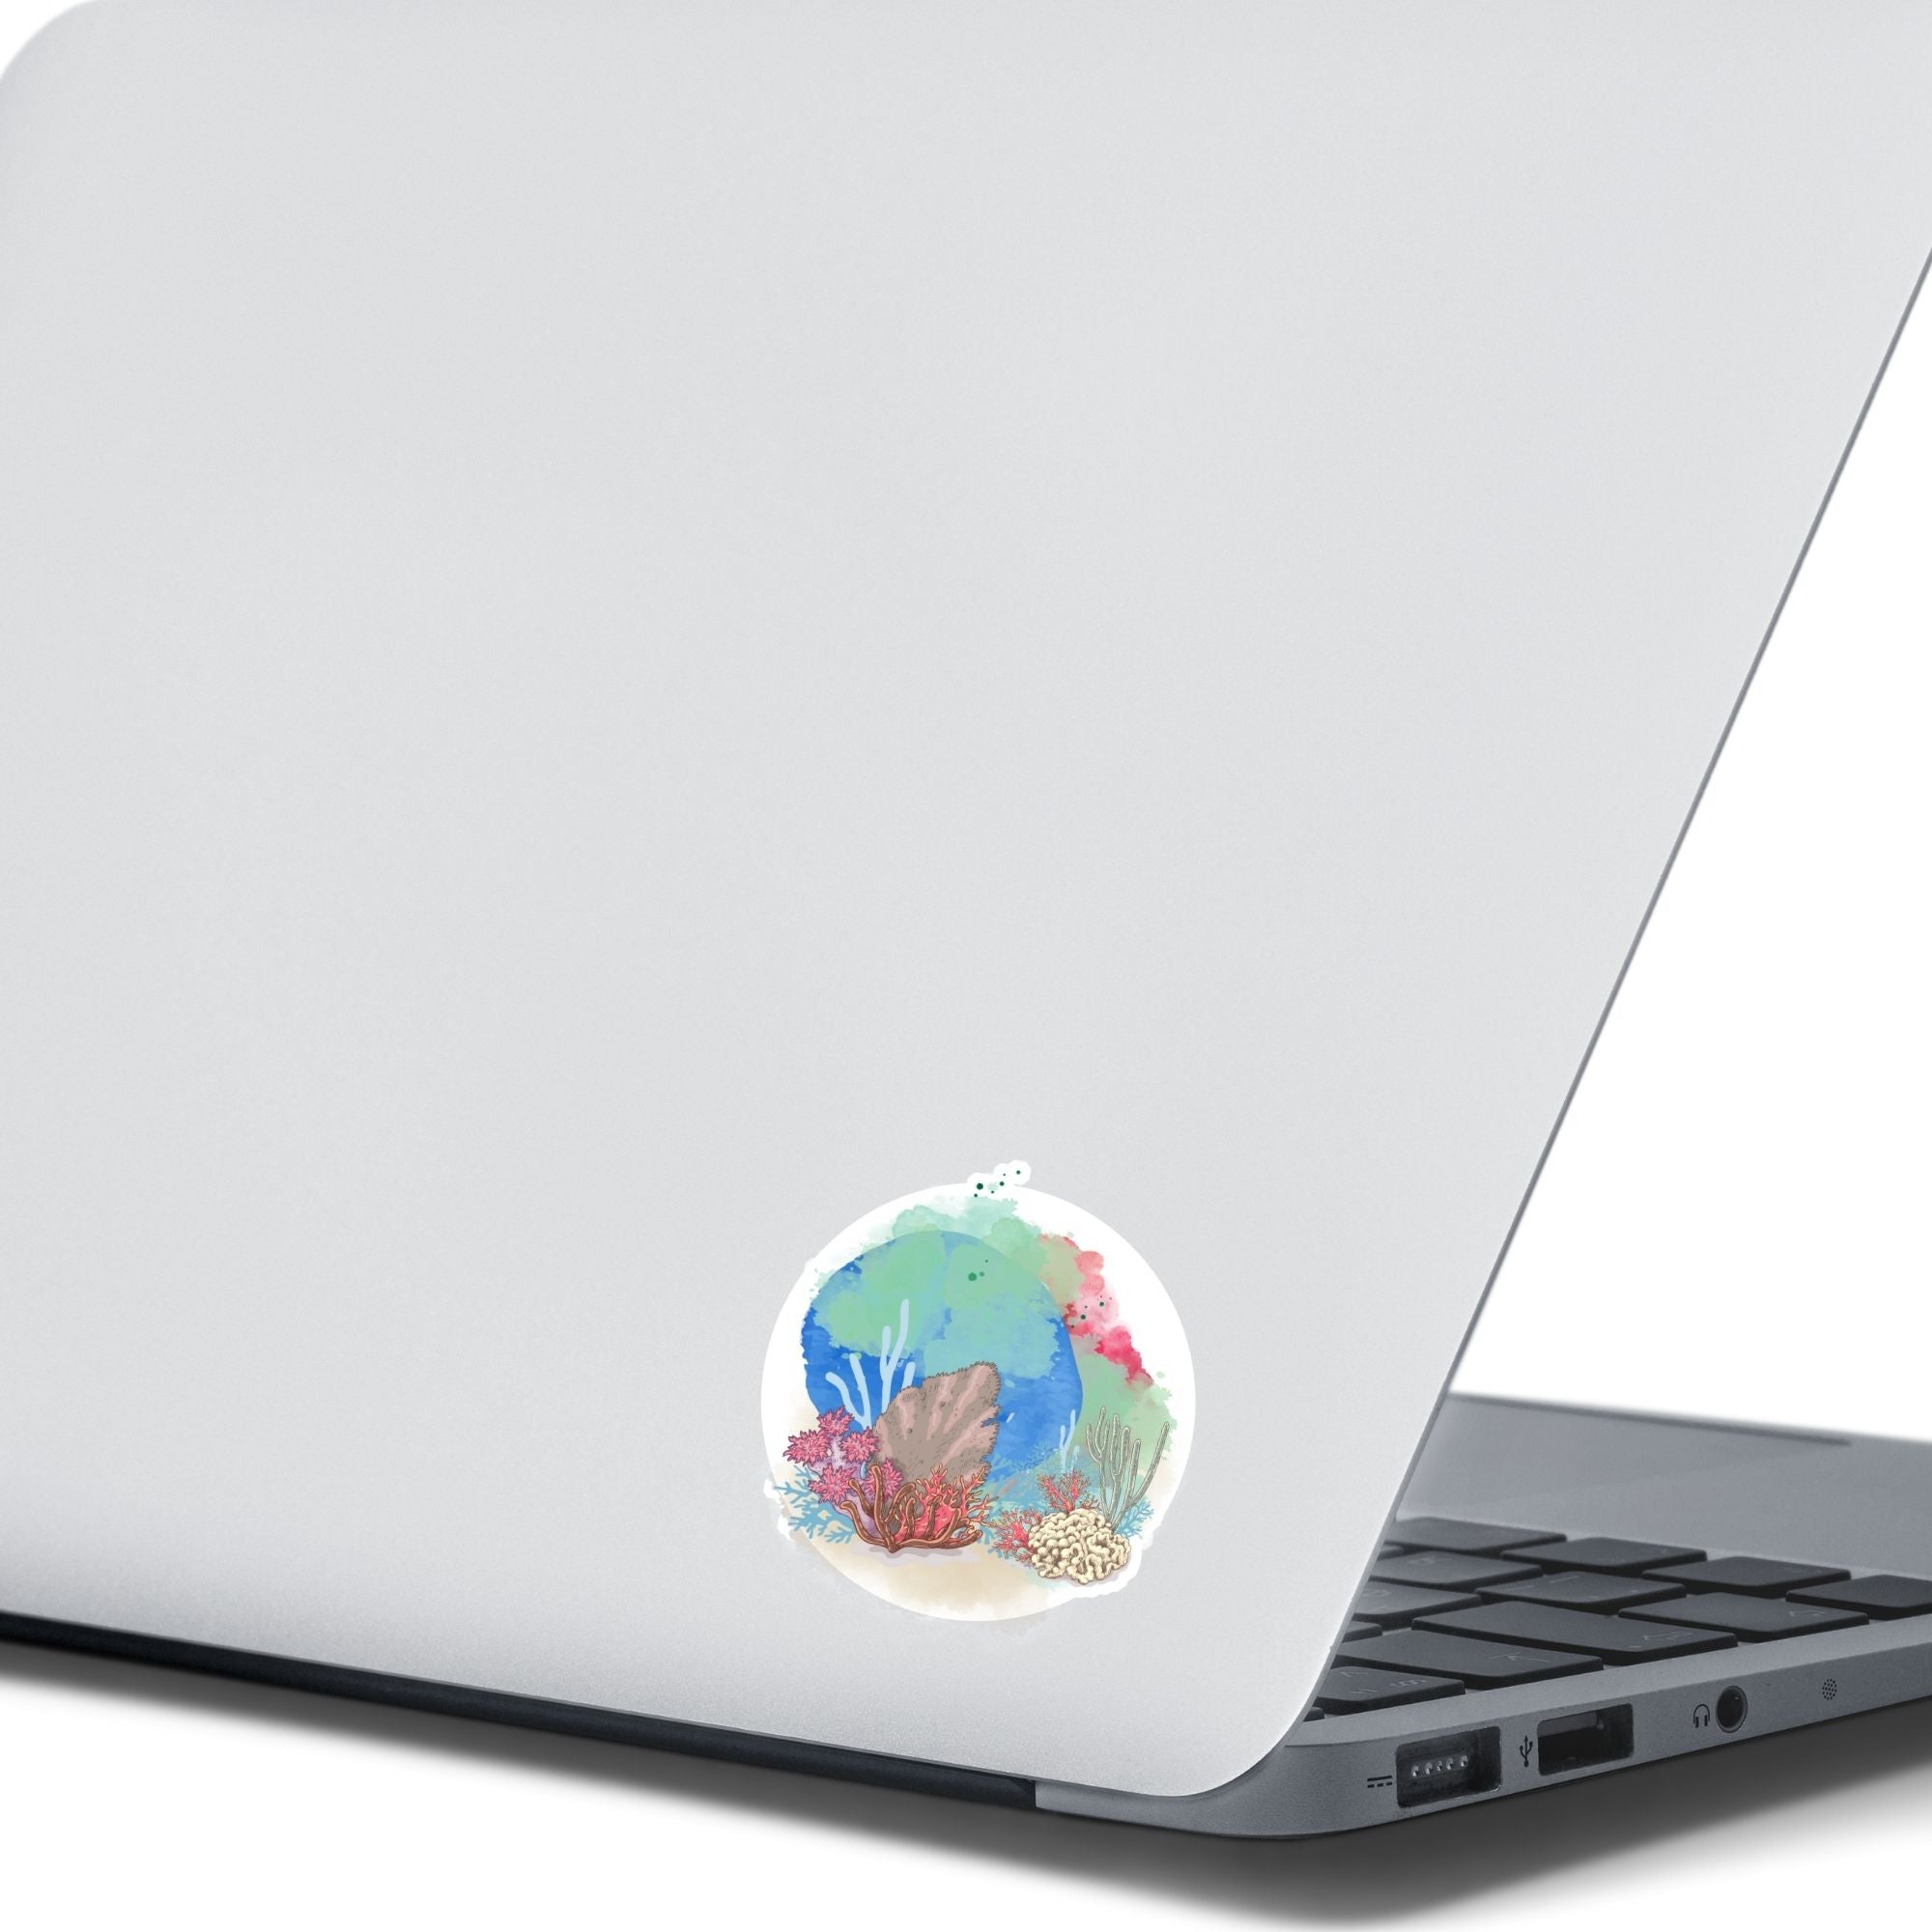 This underwater scene features corals, sand, and a pastel watercolor background on an individual die-cut sticker. With this sticker you can take the reef with you anywhere you go! This image shows the Watercolor Reef sticker on the back of an open laptop.